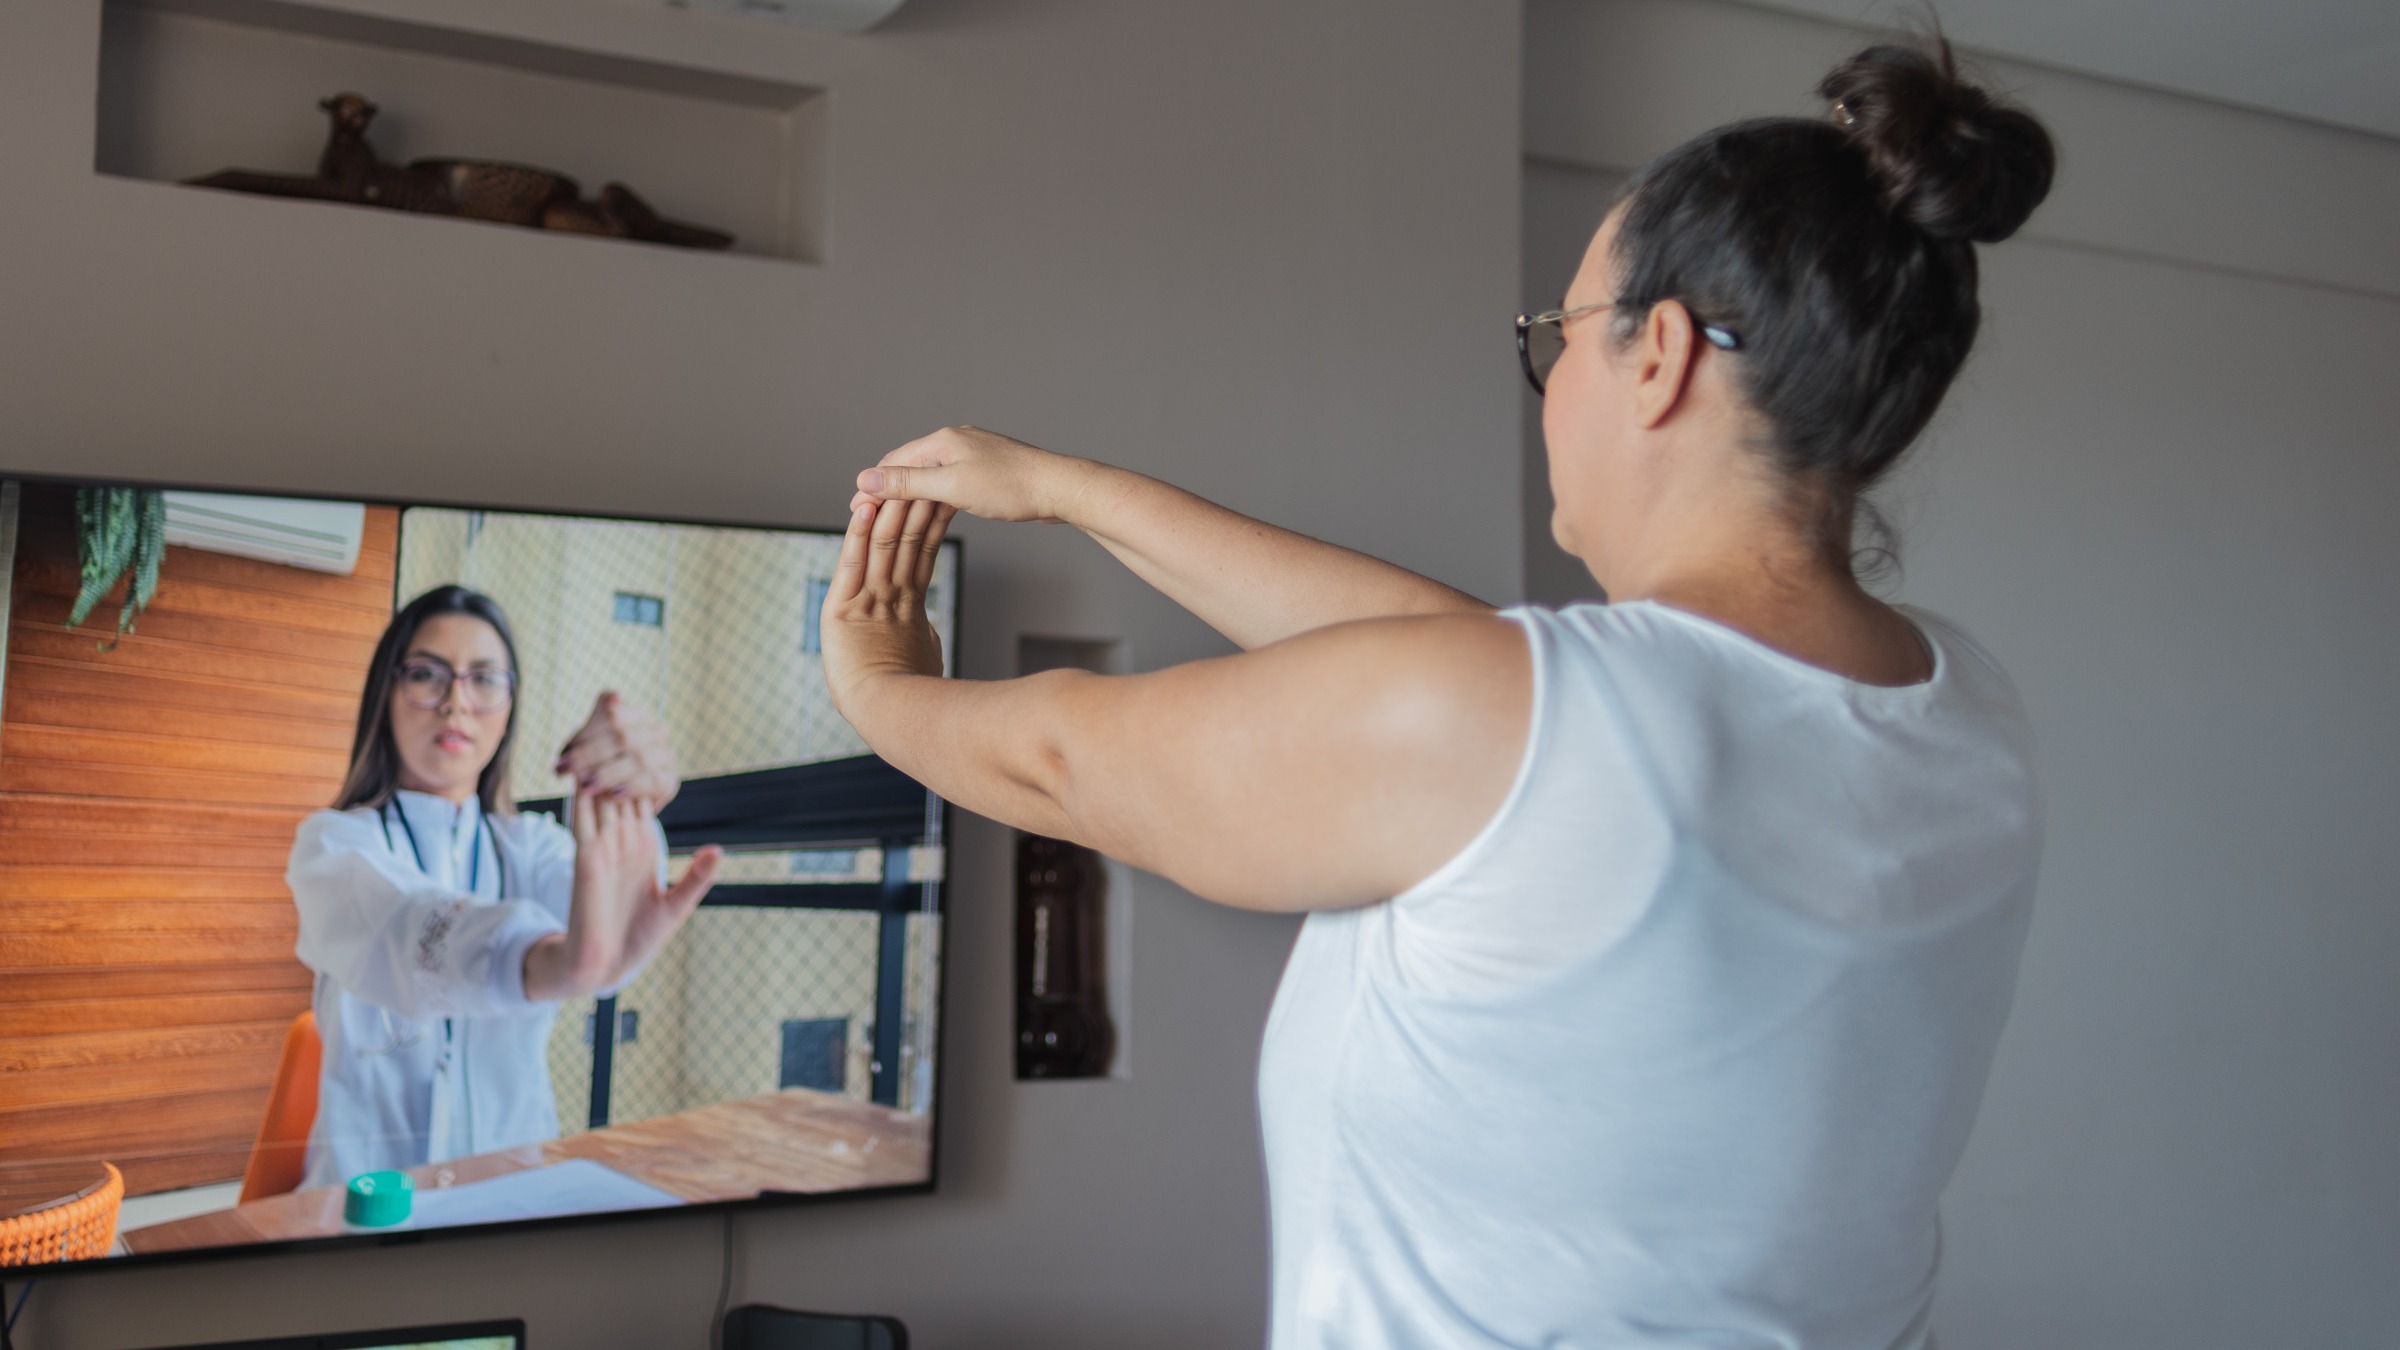 How Much Does Telehealth Physical Therapy Cost? - Agile Virtual PT